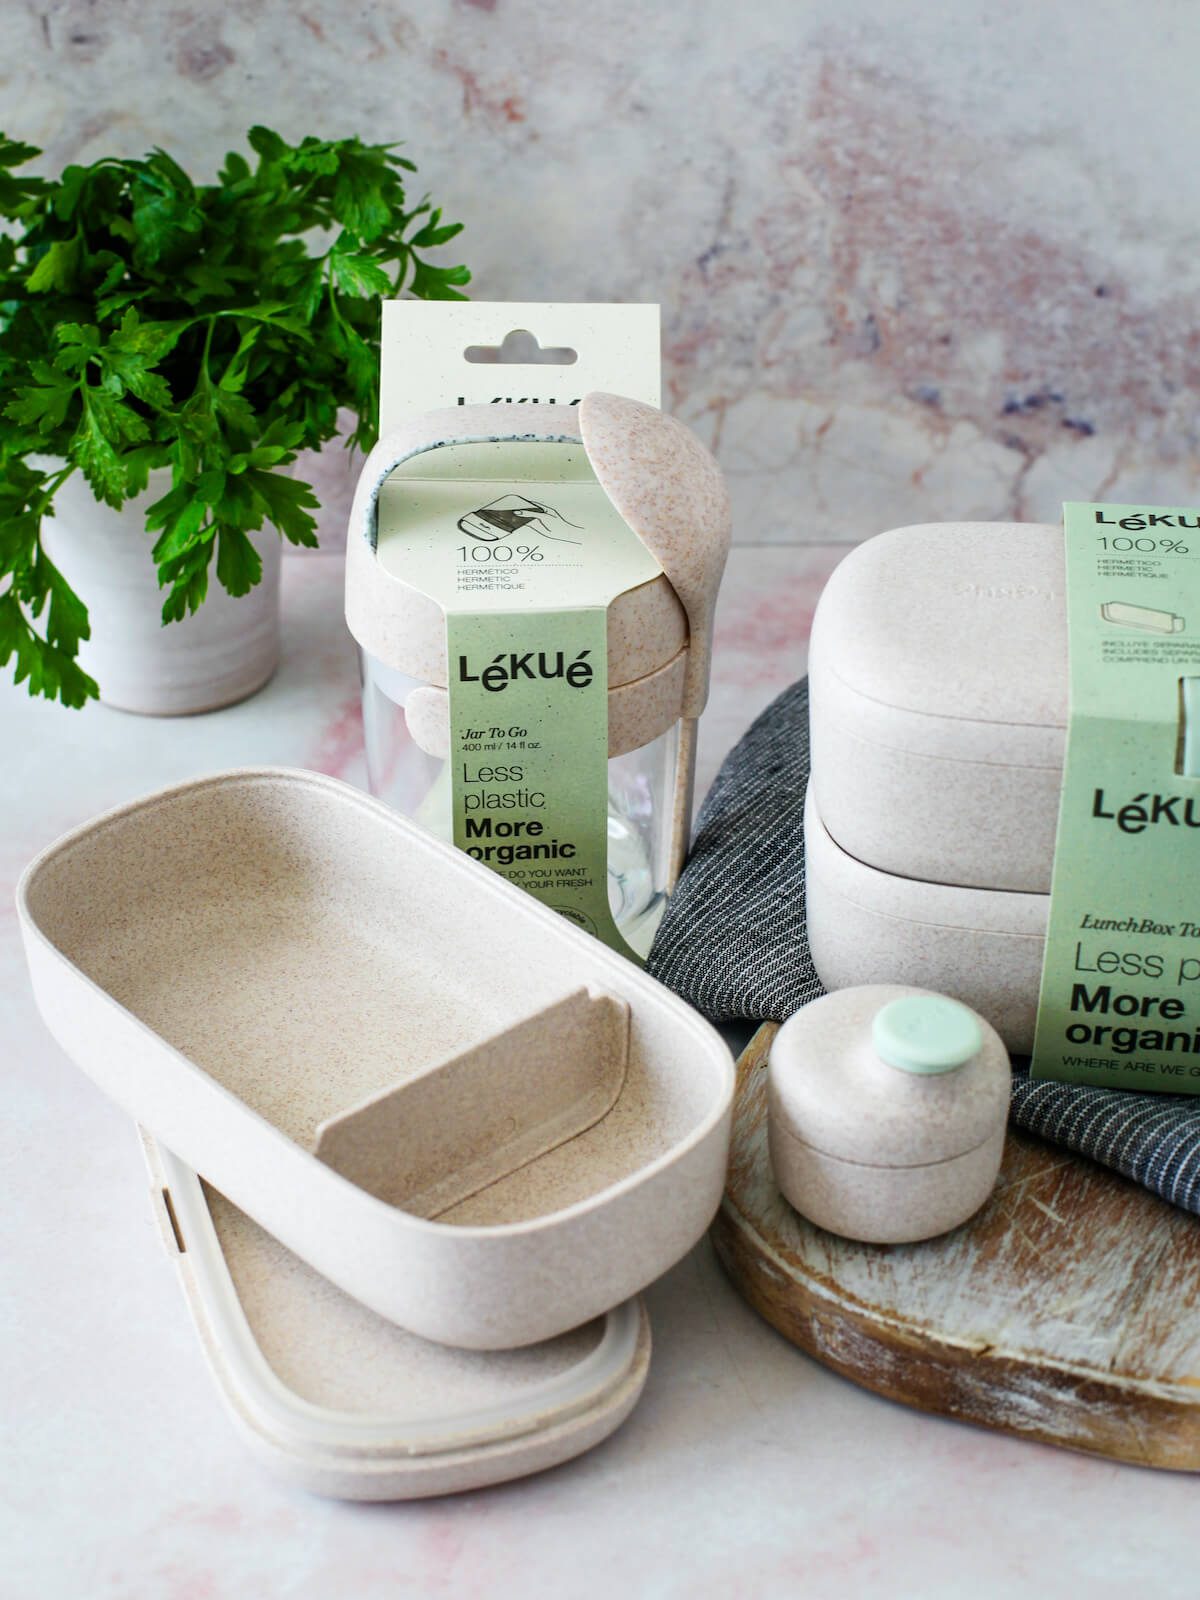 Lekue lunch containers with packaging